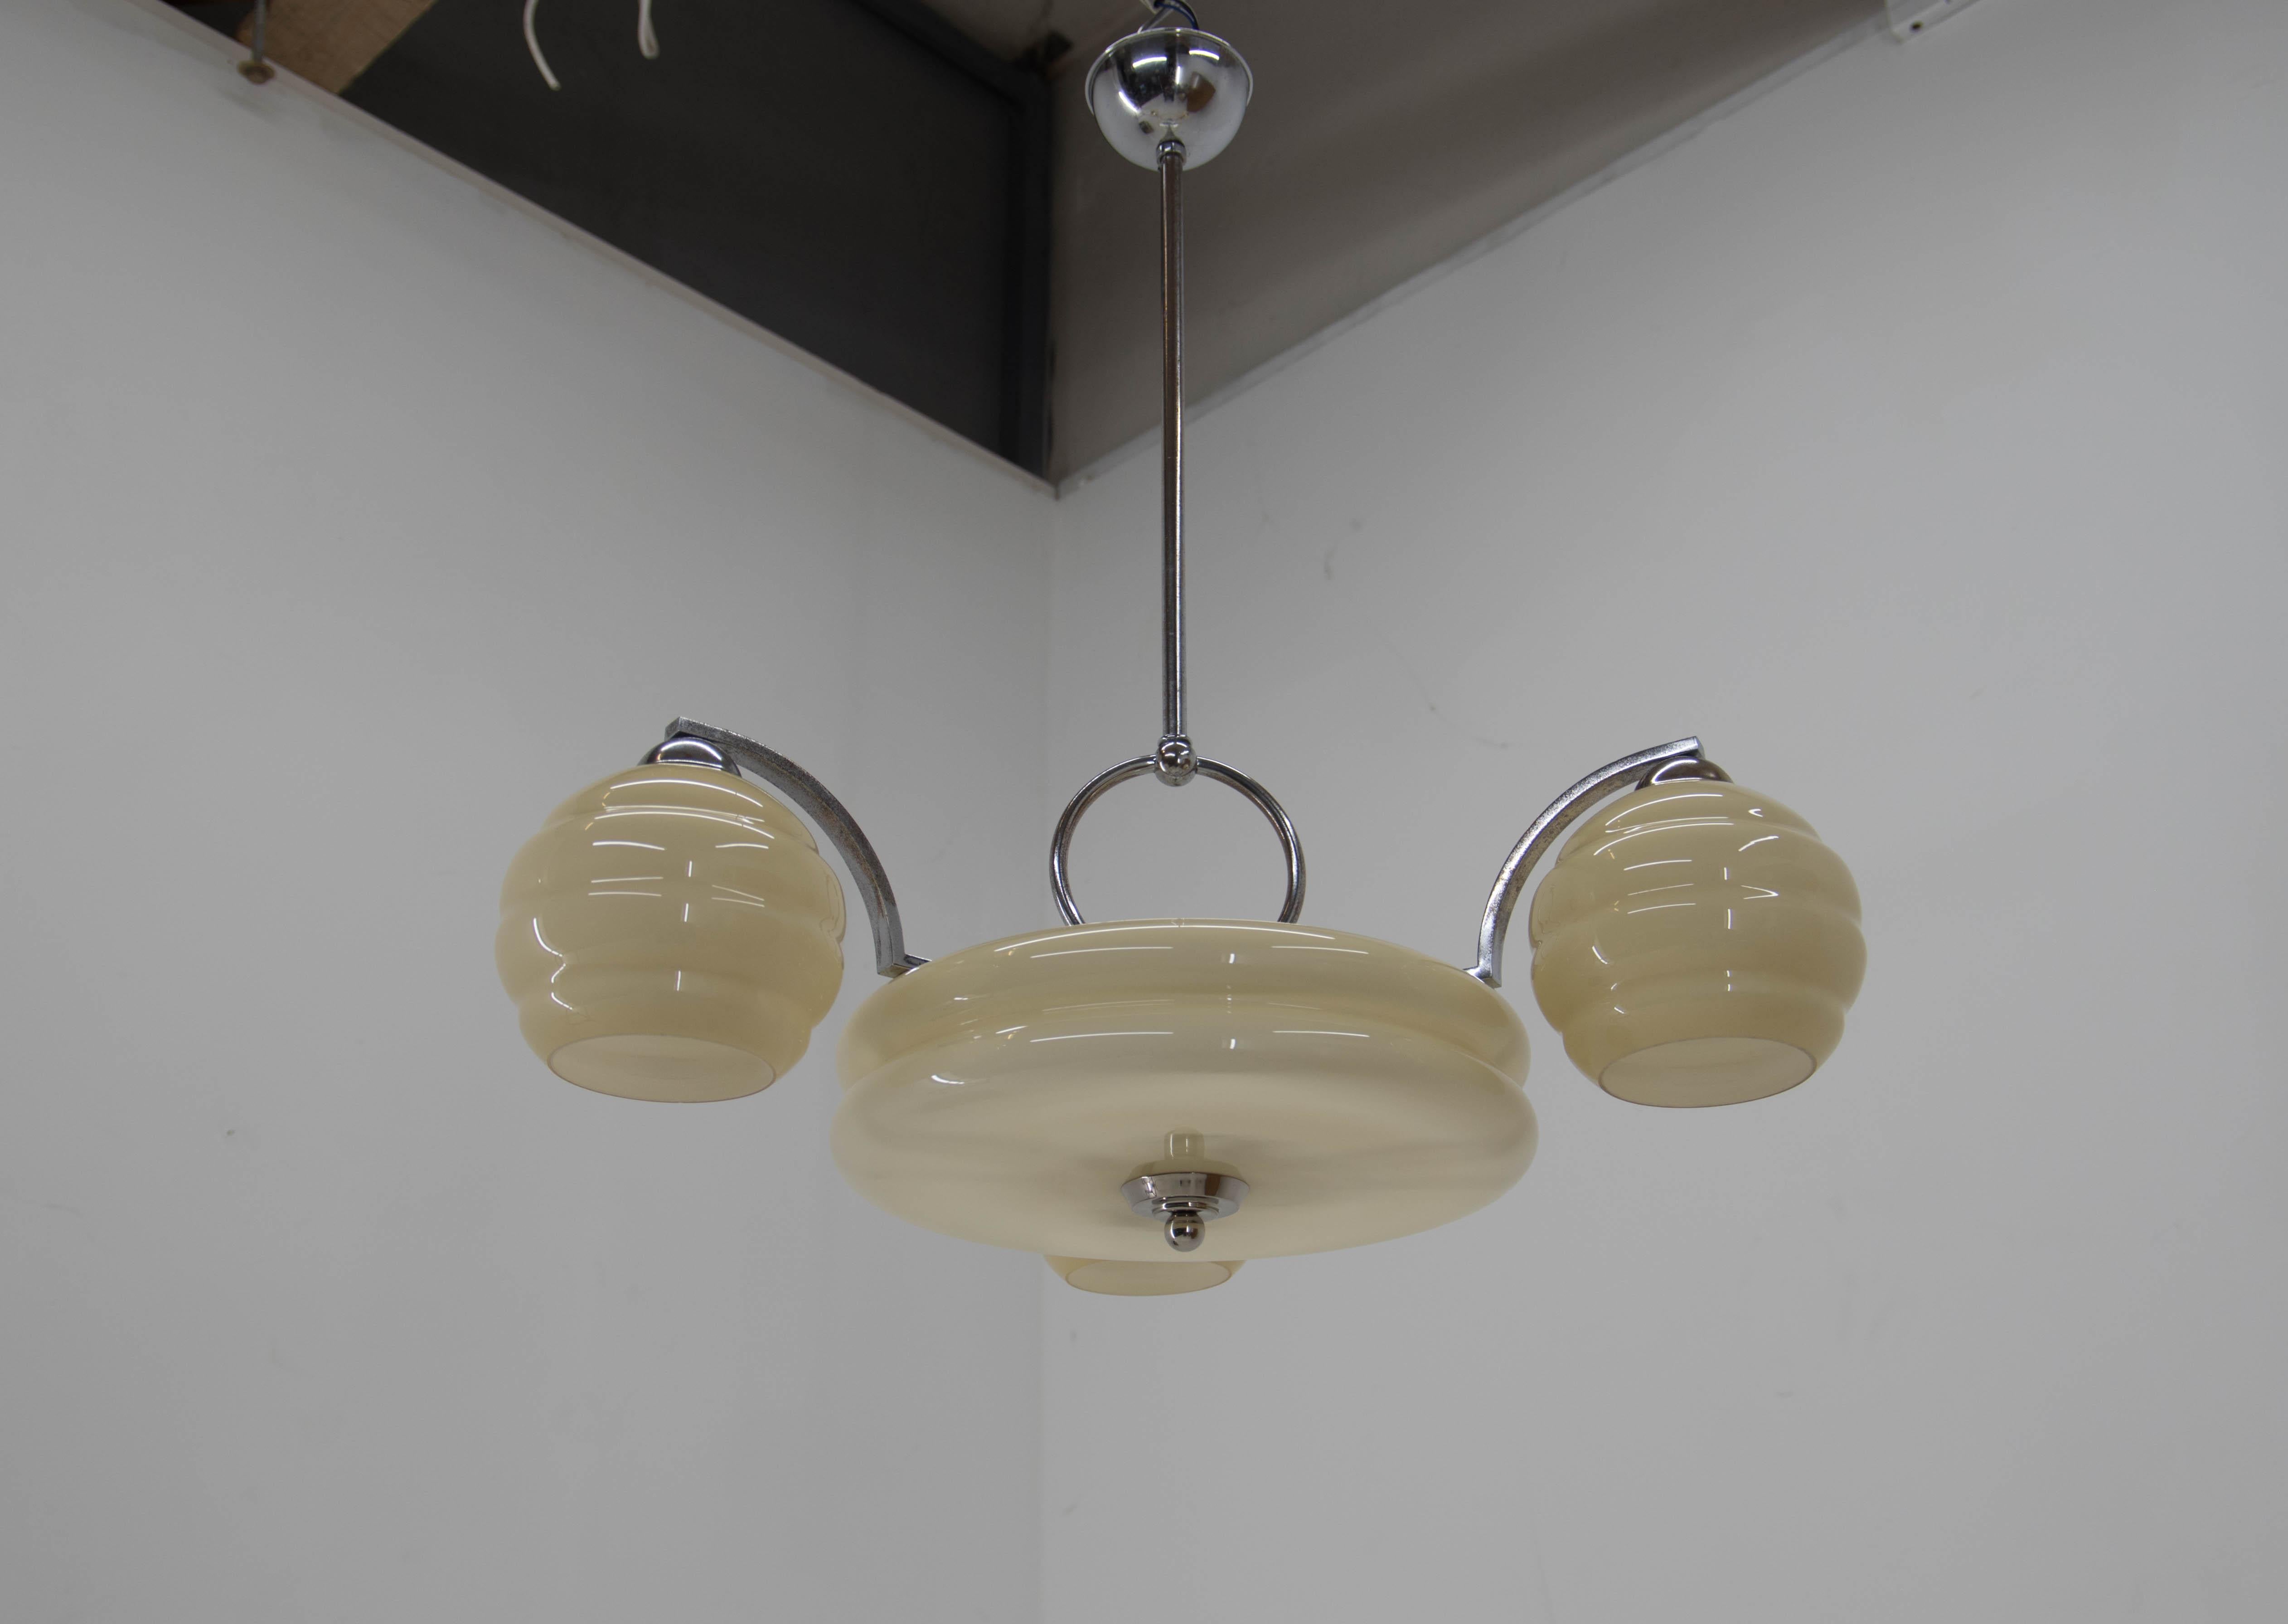 Chrome-plated Art Deco chandelier with two separate circuits.
Restored: chrome with age patina polished.
Rewired: 3+2x40W, E25-E27 bulbs
Glass in perfect condition.
US wiring compatible.